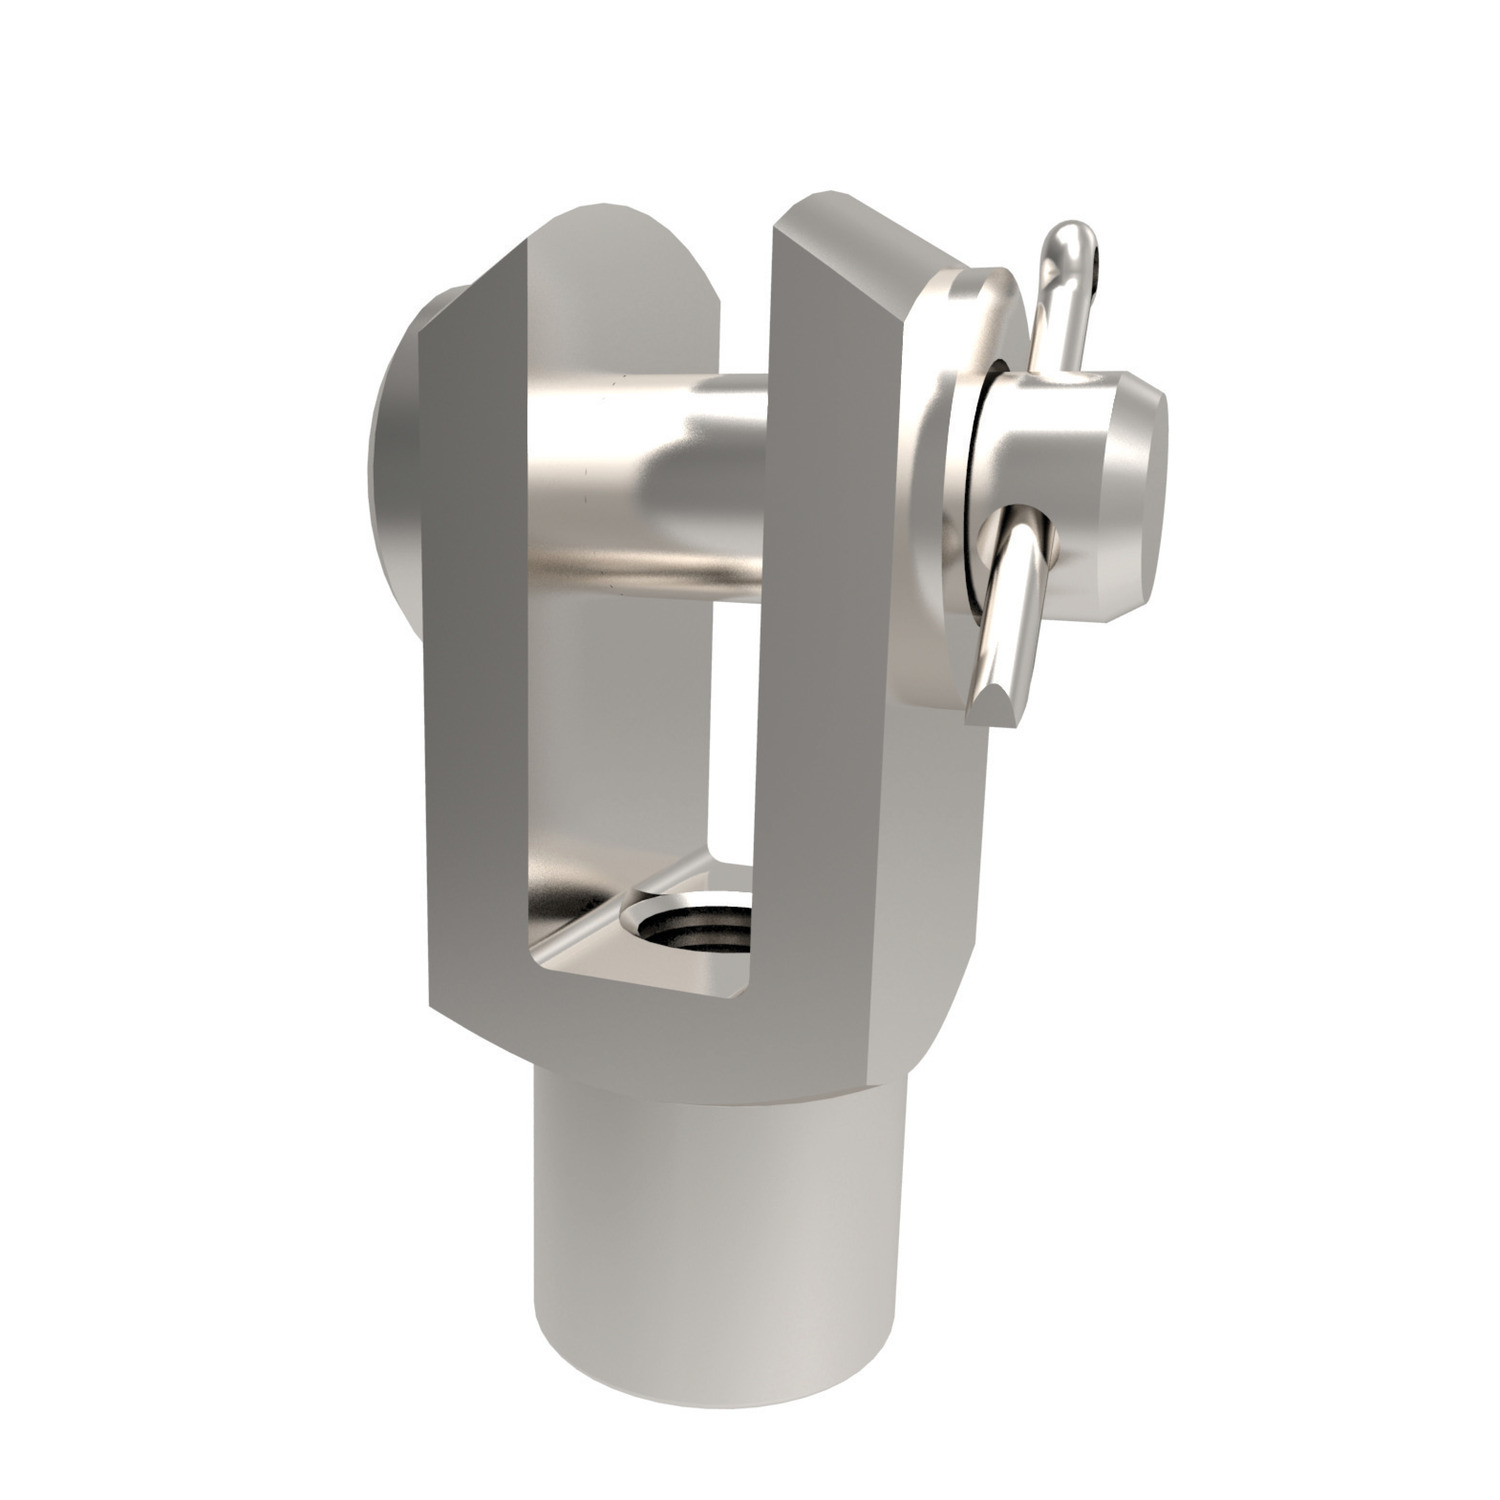 Clevis Joints - Stainless Steel Full stainless steel clevis joint with pin with standard right hand thread. Assembly is made using individual parts: pin 65661, washers 65671 and split cotter pin 65675.